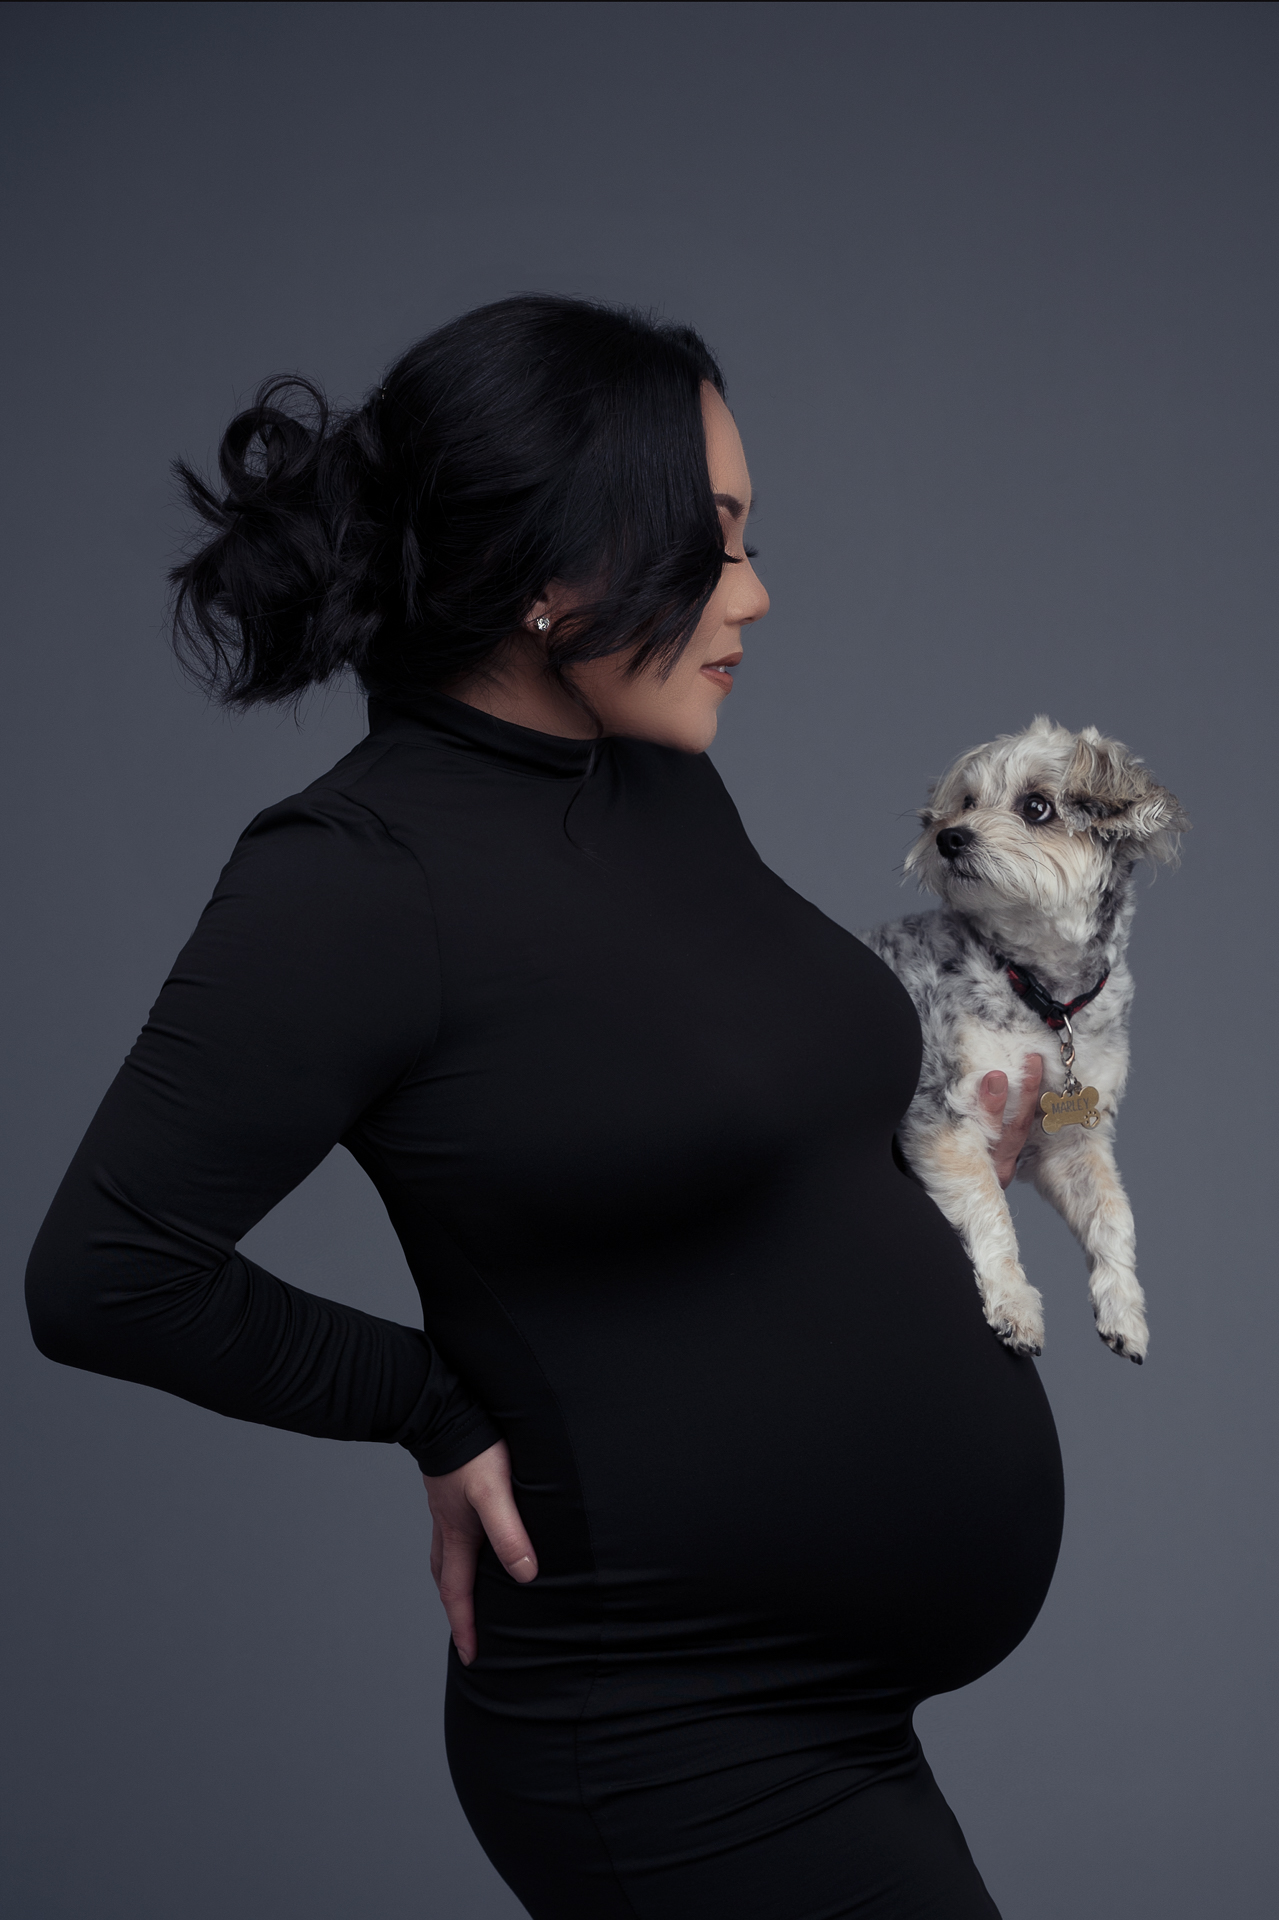 pregnant woman posing with her small dog on a black dress